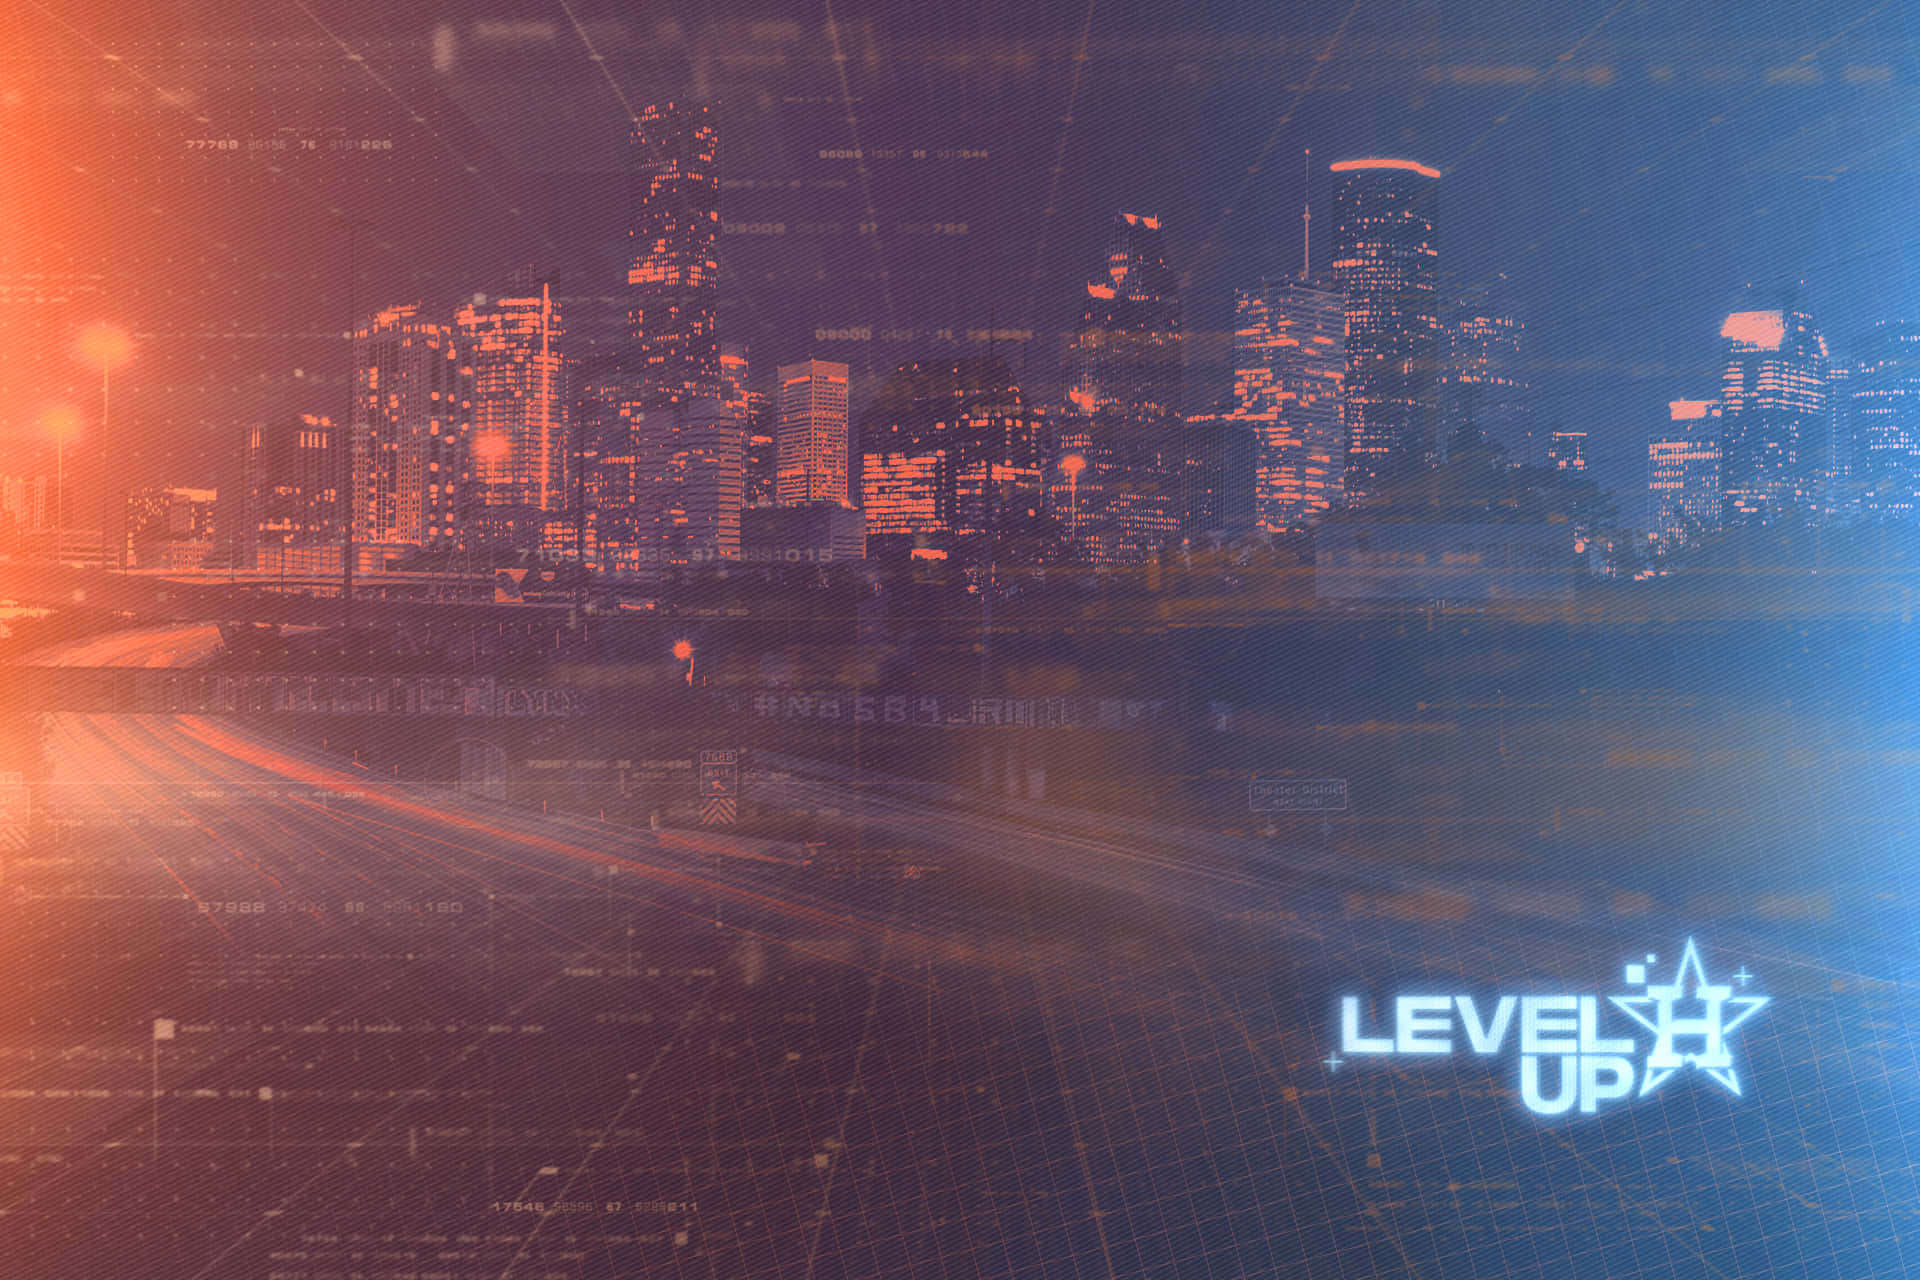 Level Up Cover Photo Wallpaper